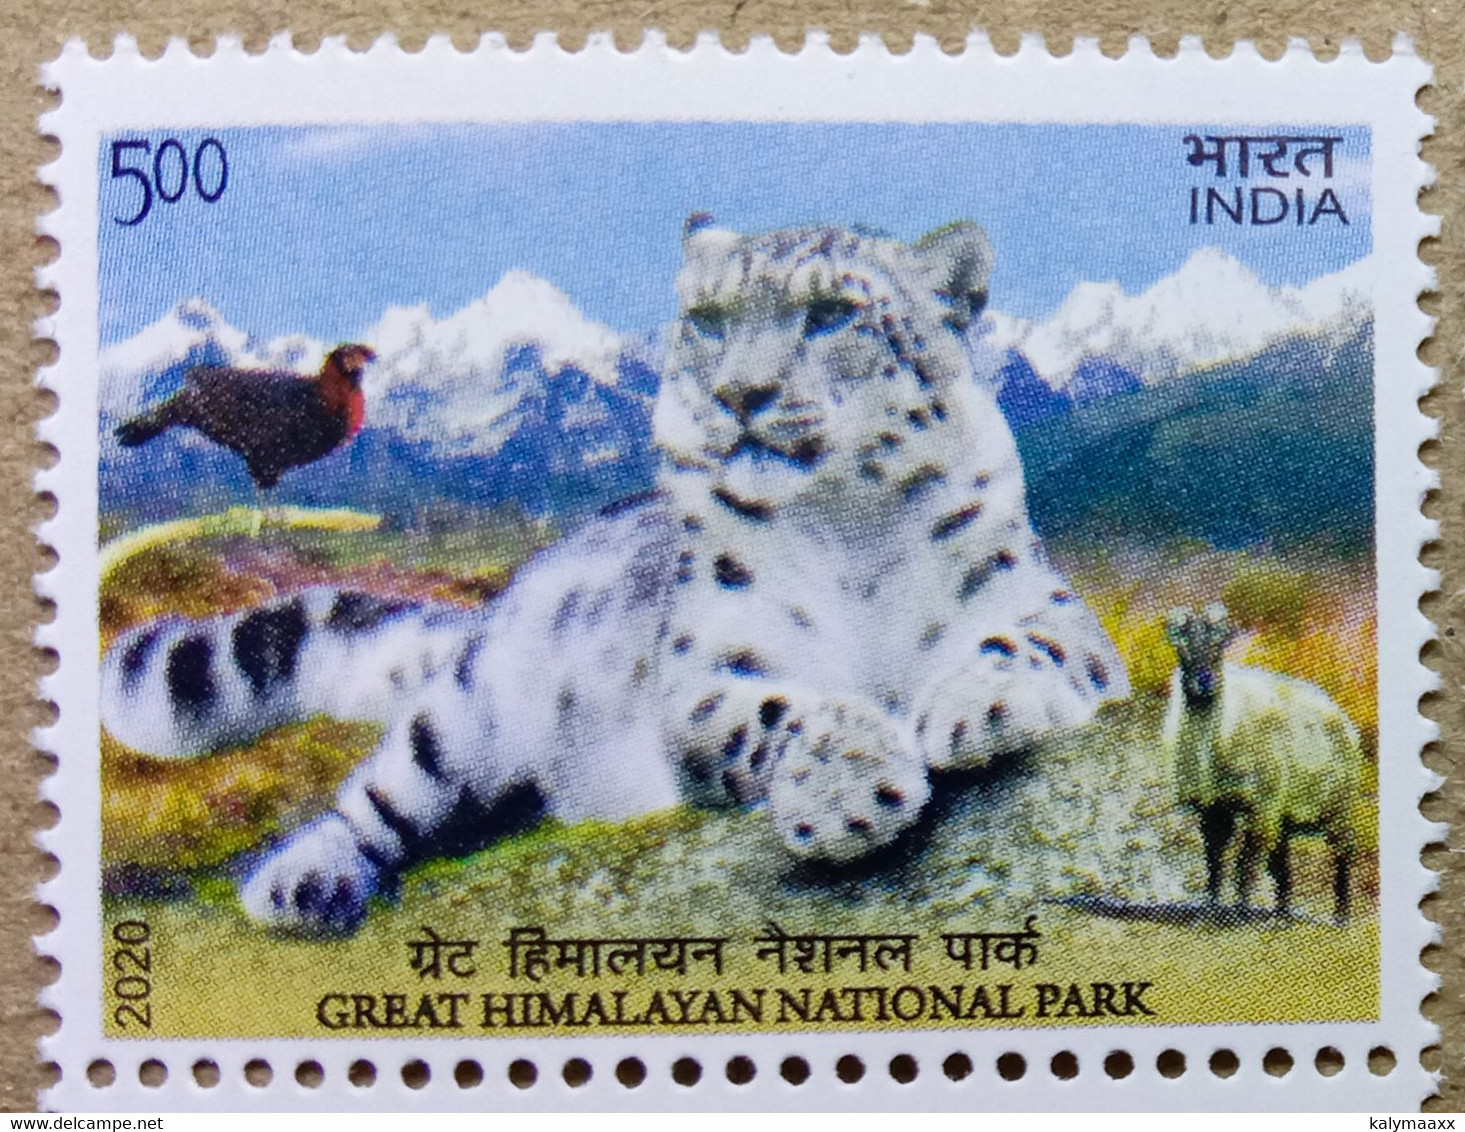 INDIA 2020 UNESCO GREAT HIMALAYAN NATIONAL PARK, SNOW LEOPARD, WHITE TIGER, WILD LIFE.....MNH - Ungebraucht